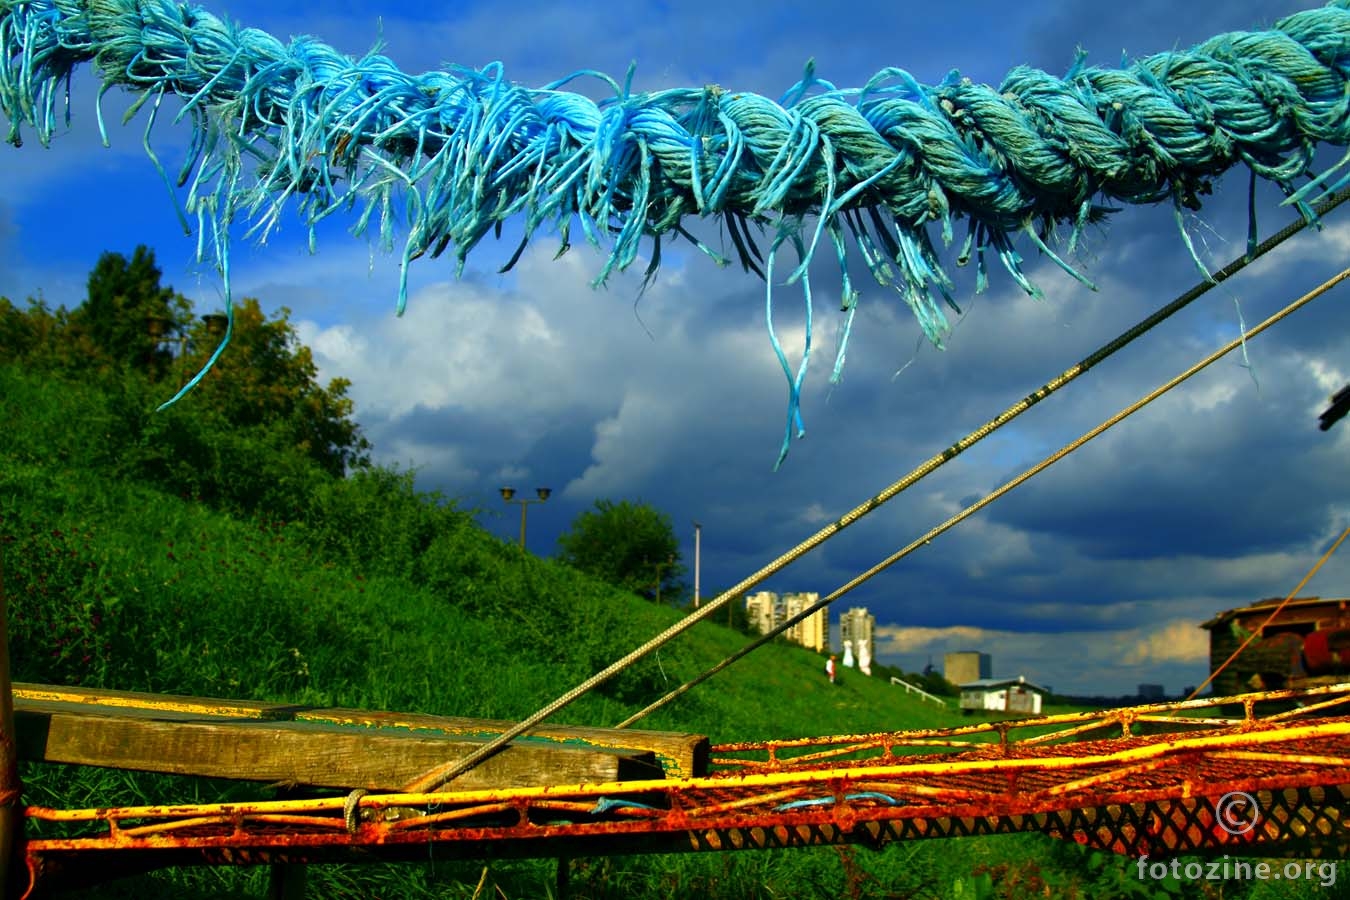 The blue rope of hope